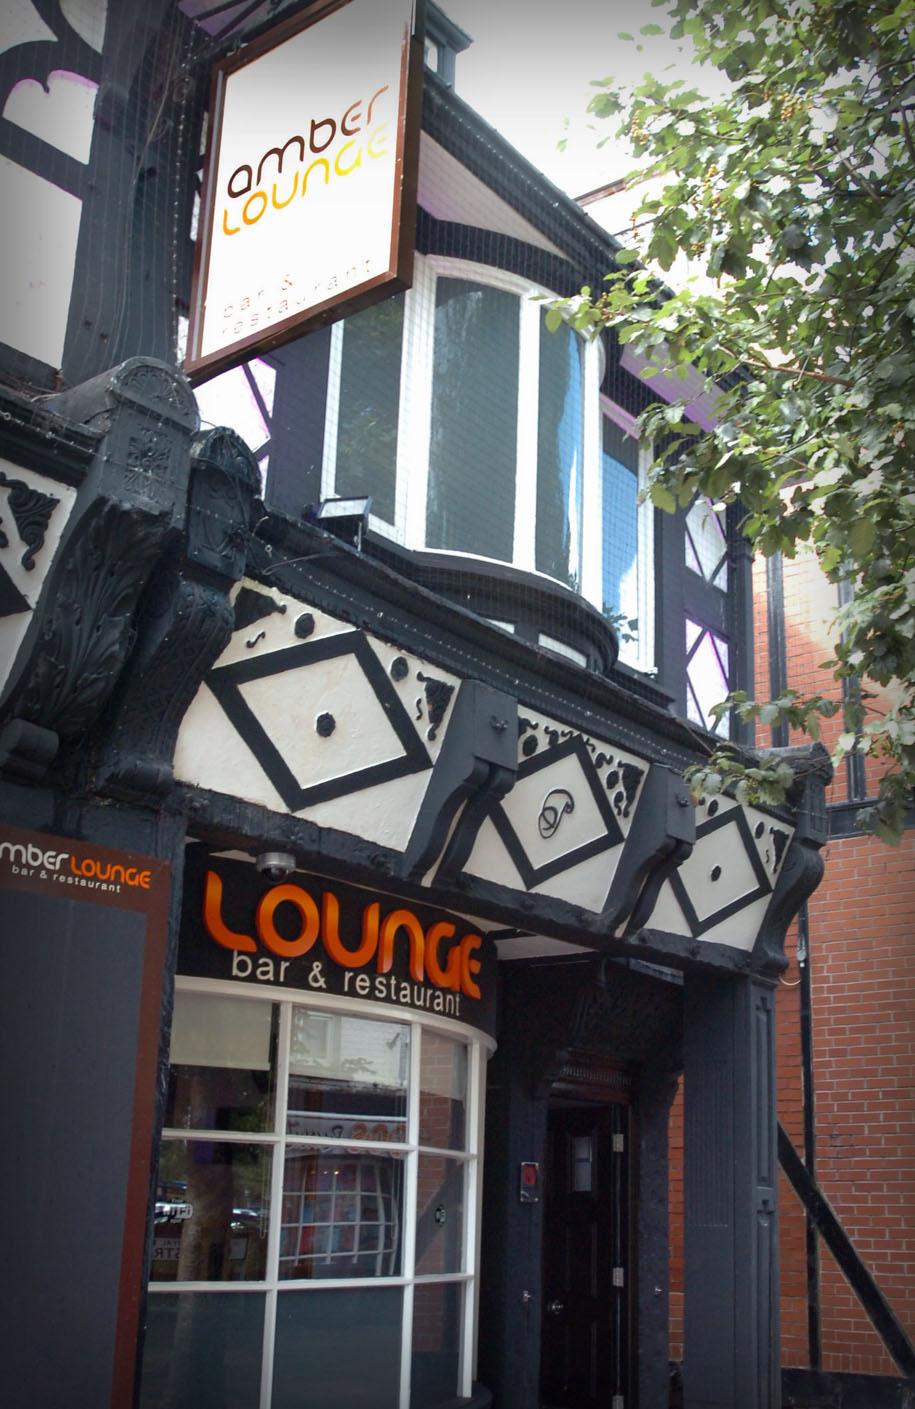 Amber Lounge in Northwich. Renovated following a fire, now Cheshire Bar and Grill